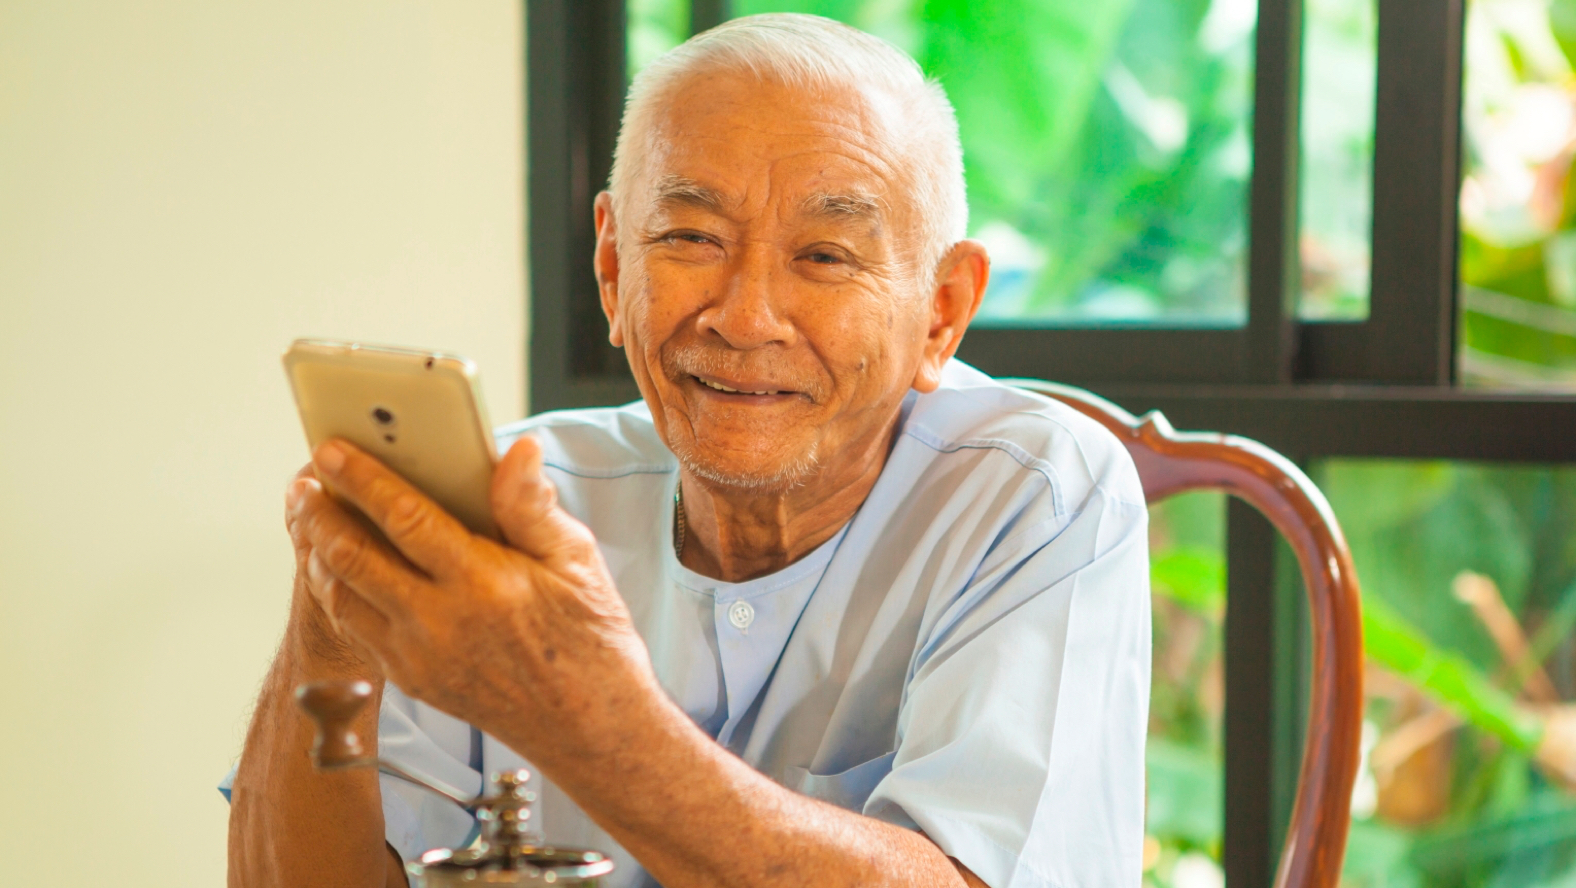 Integrating technology & care provisioning for ageing in place